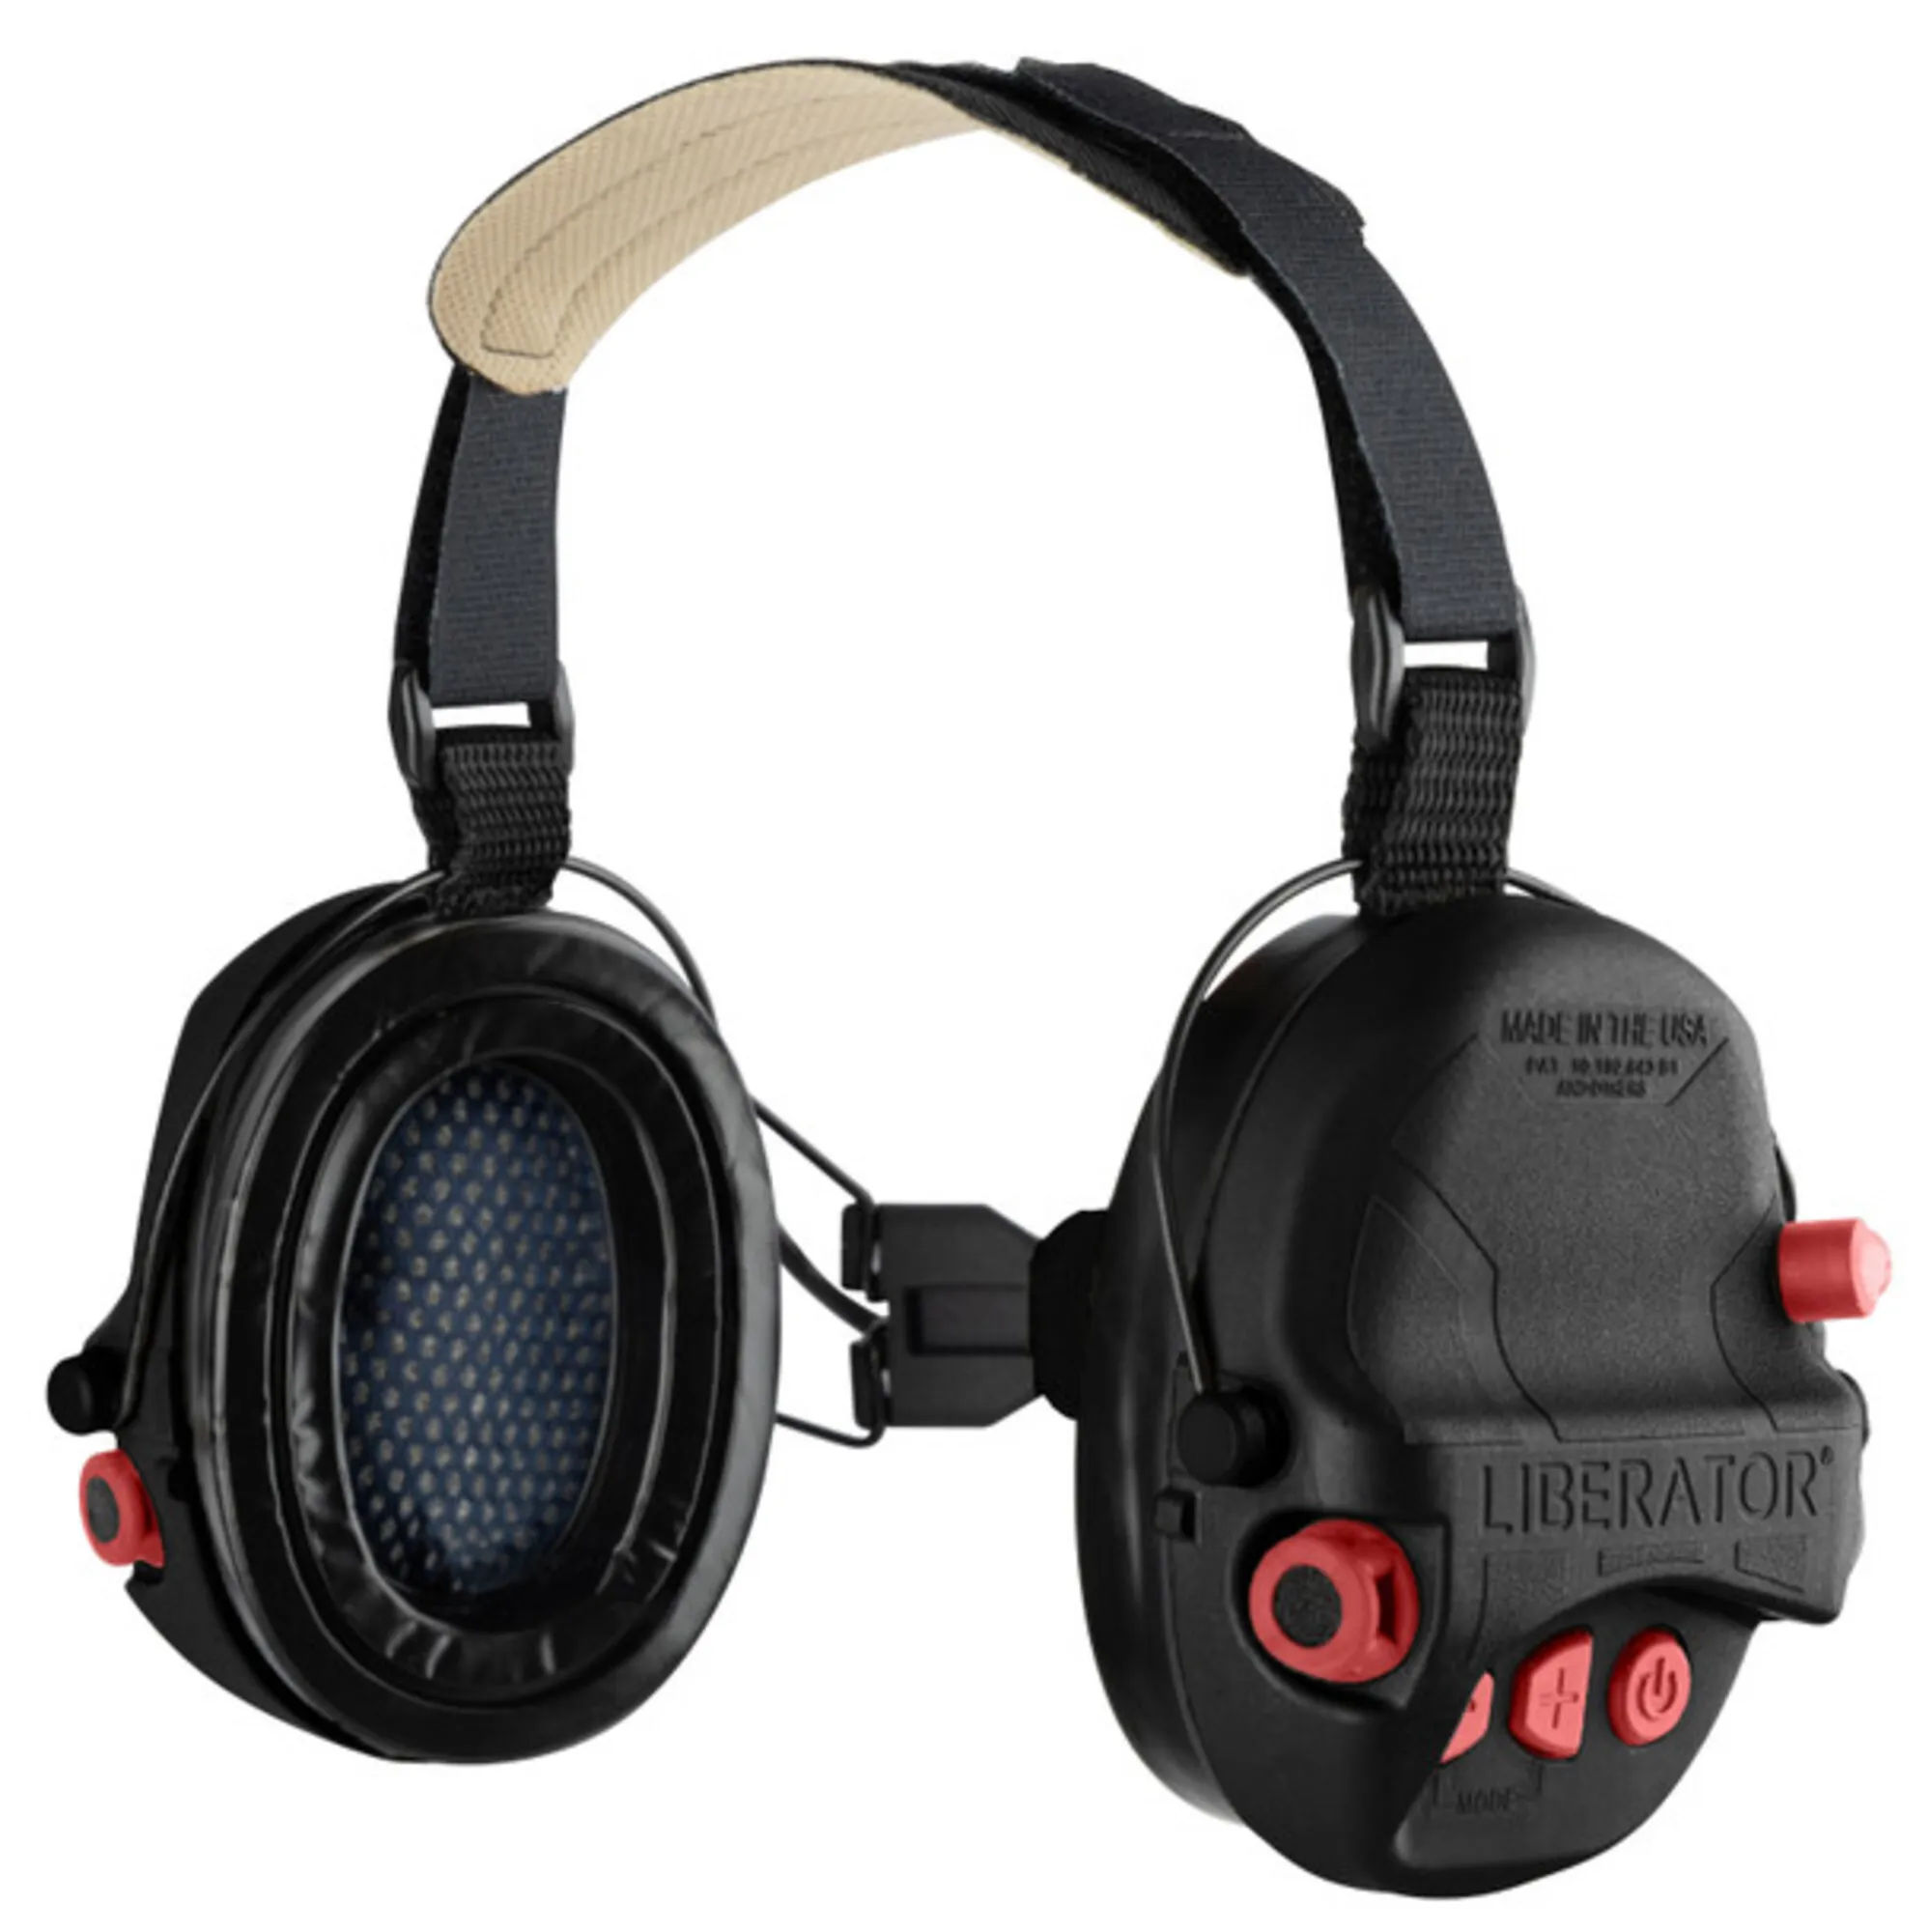 Safariland Liberator HP 2.0 Hearing Protection with BTH and ARC Rail Helmet Mount in Black and Red